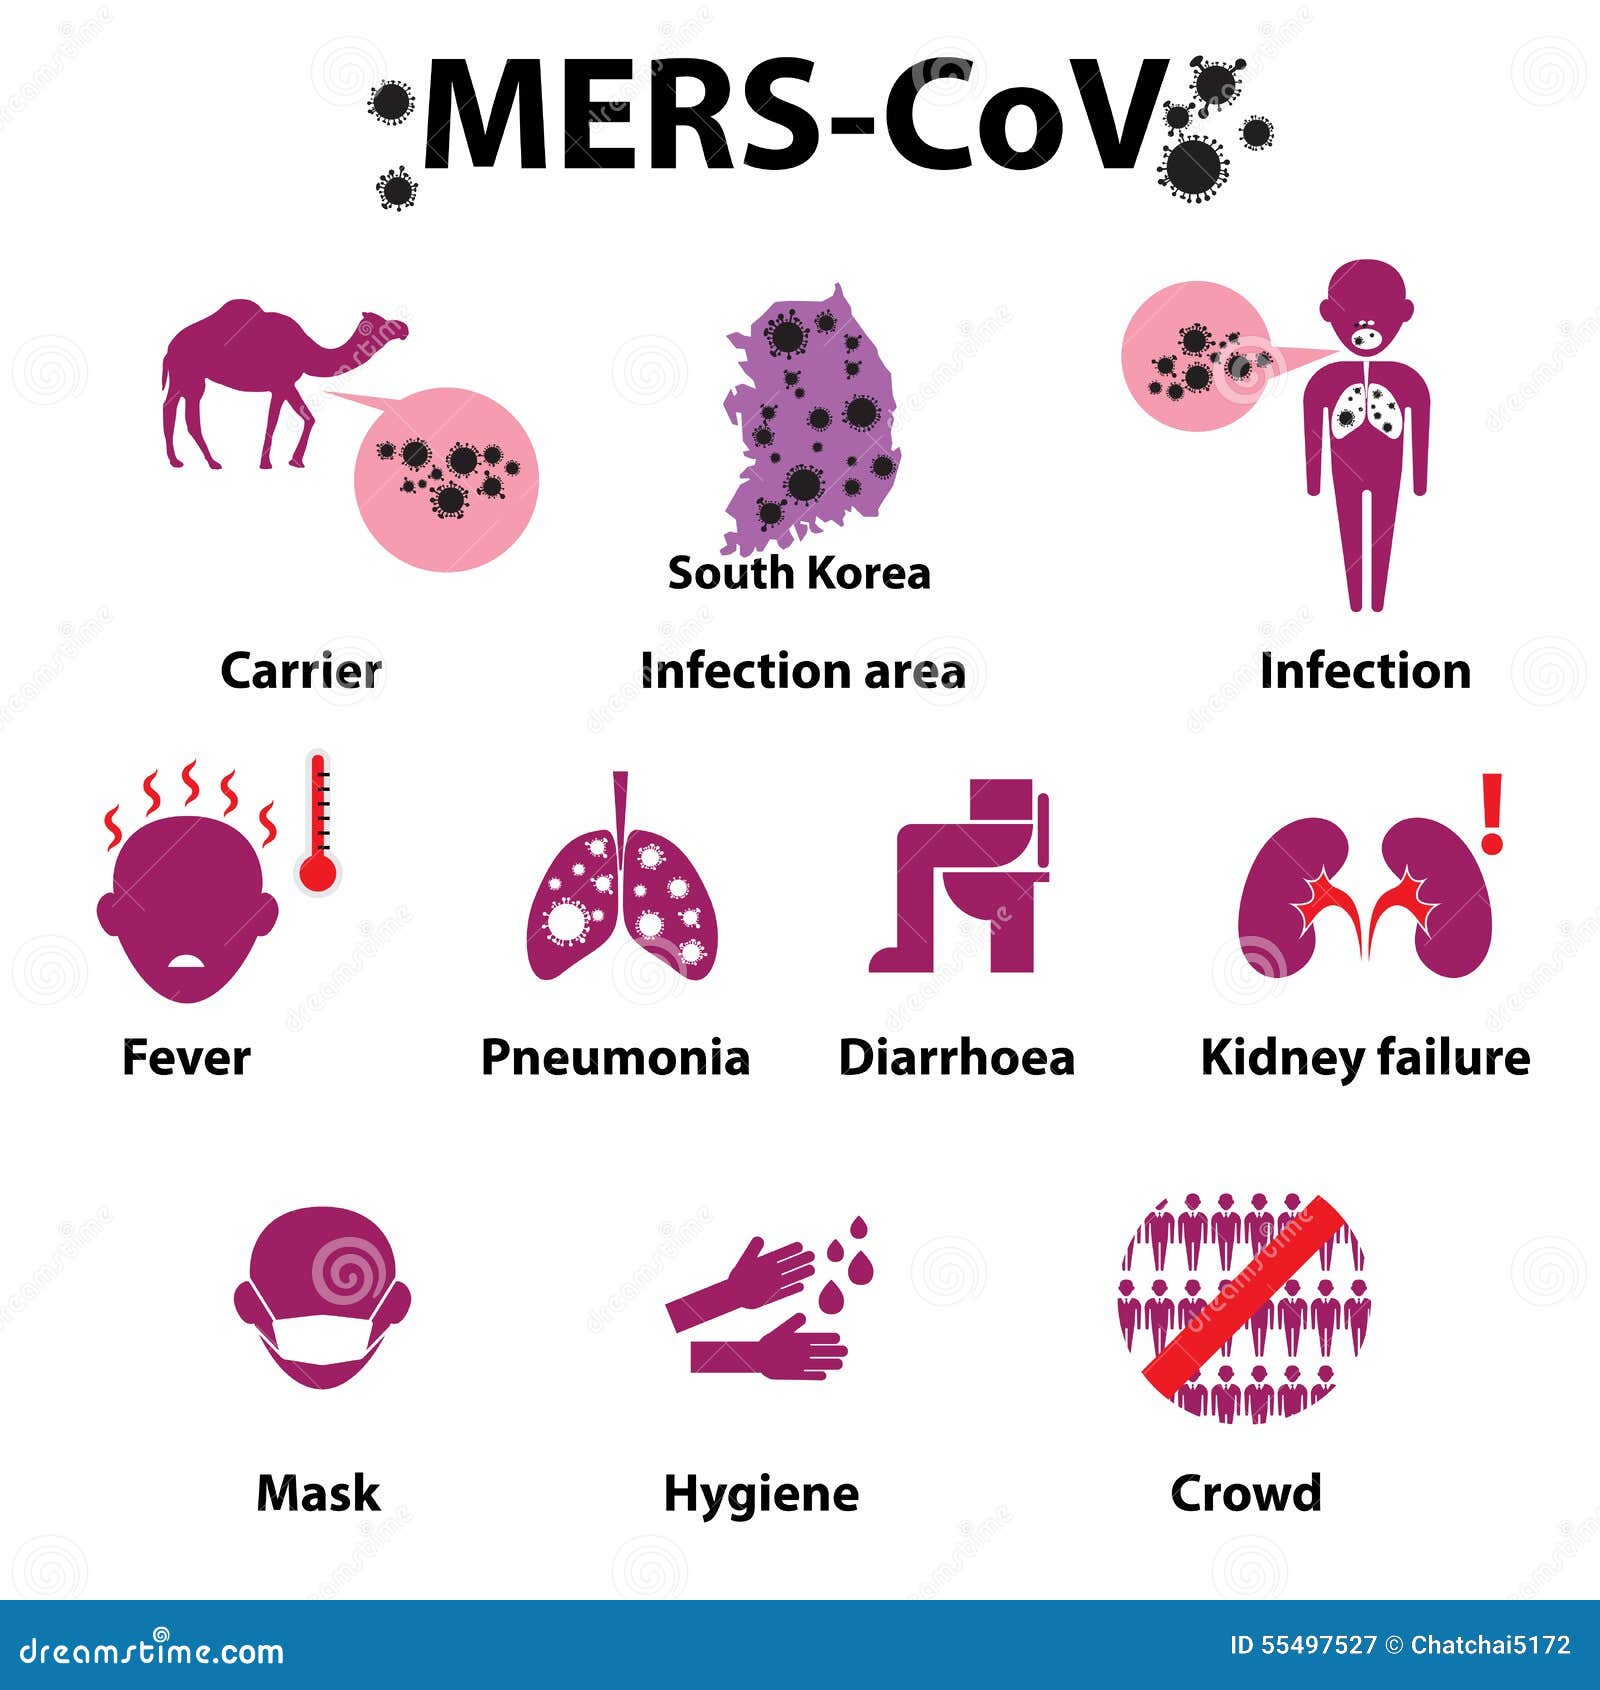 MERS-COV Or Middle East Respiratory Syndrome Corona Virus Stock Vector - Image: 55497527